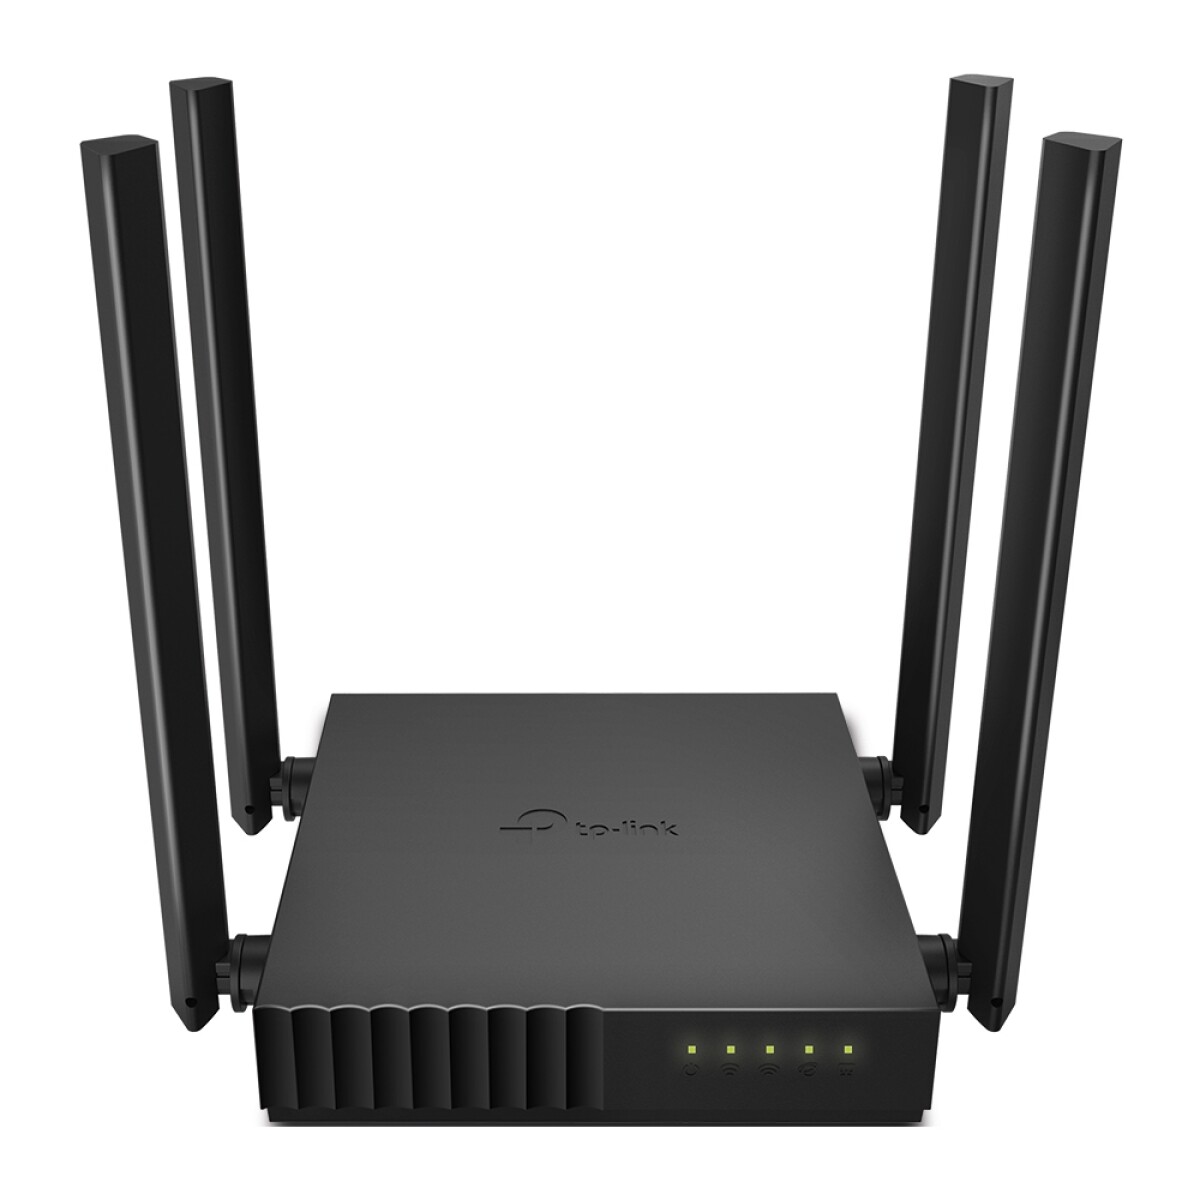 Router Wireless Tp-link Archer C50 Dual Band AC1200 - 001 